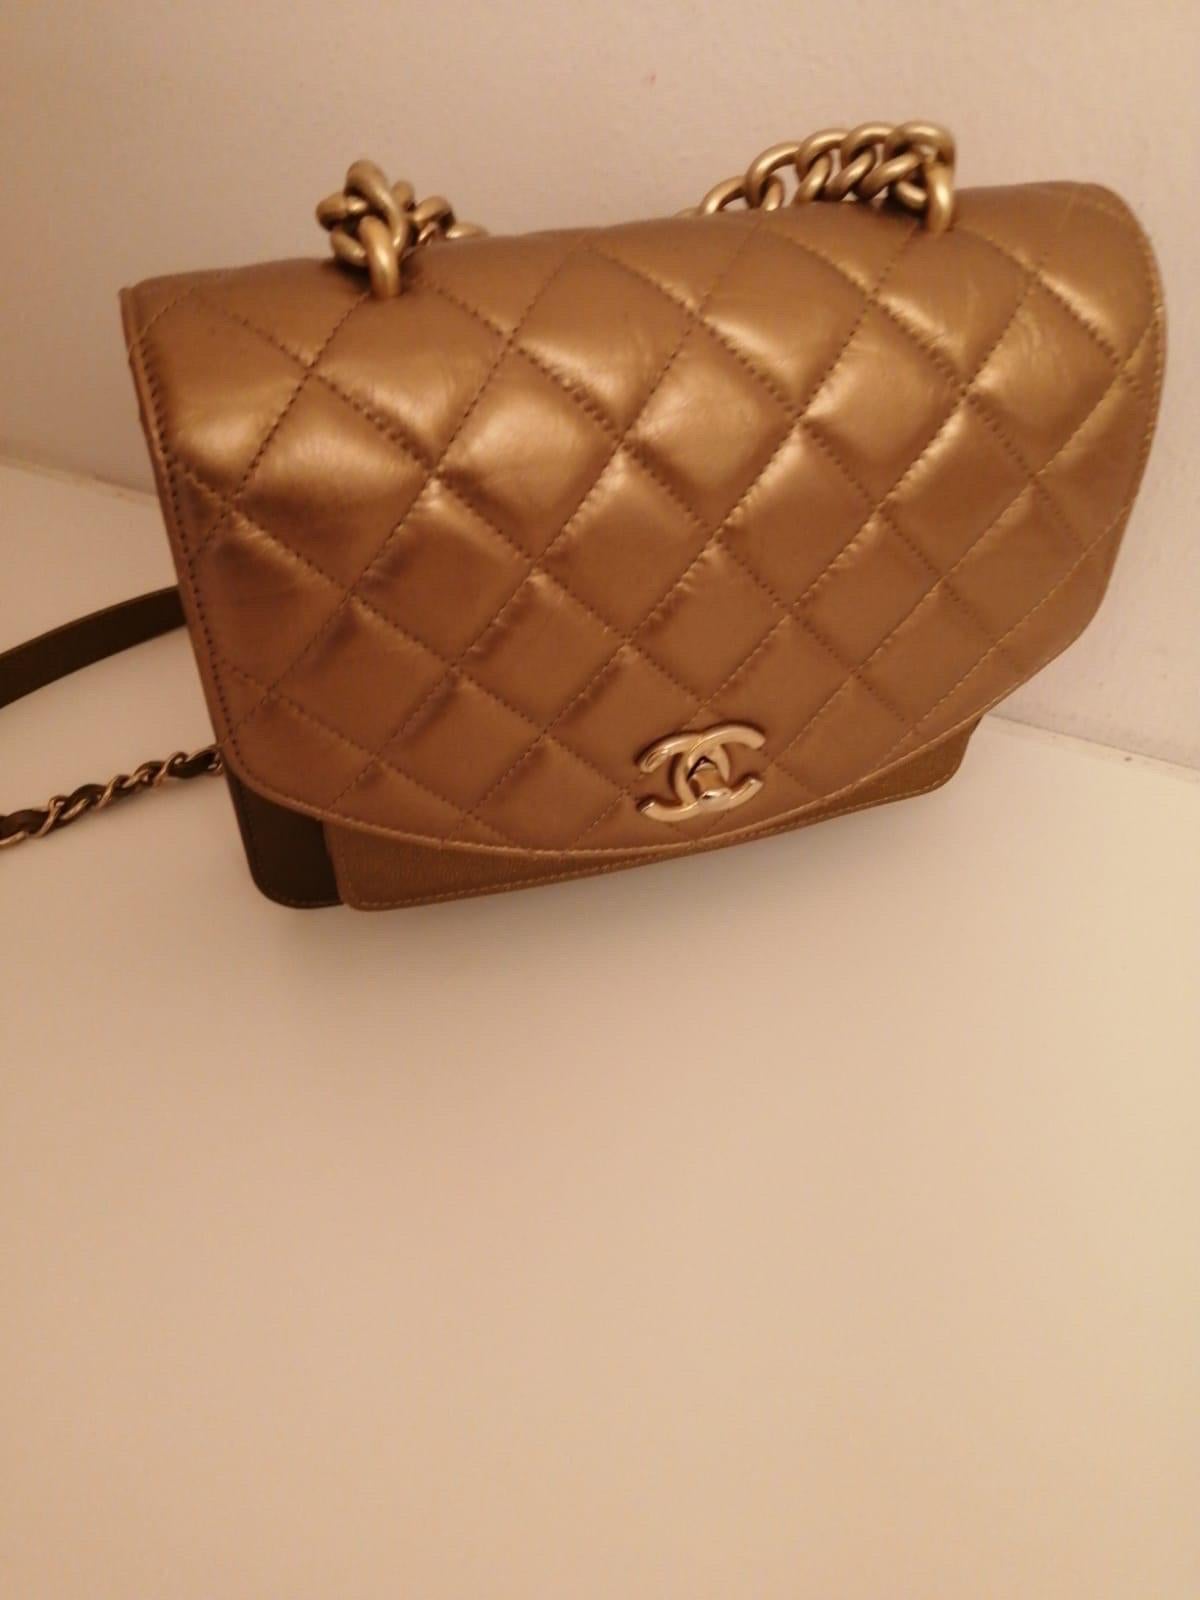 Chanel Business Affinity full set pari al nuovo For Sale 2